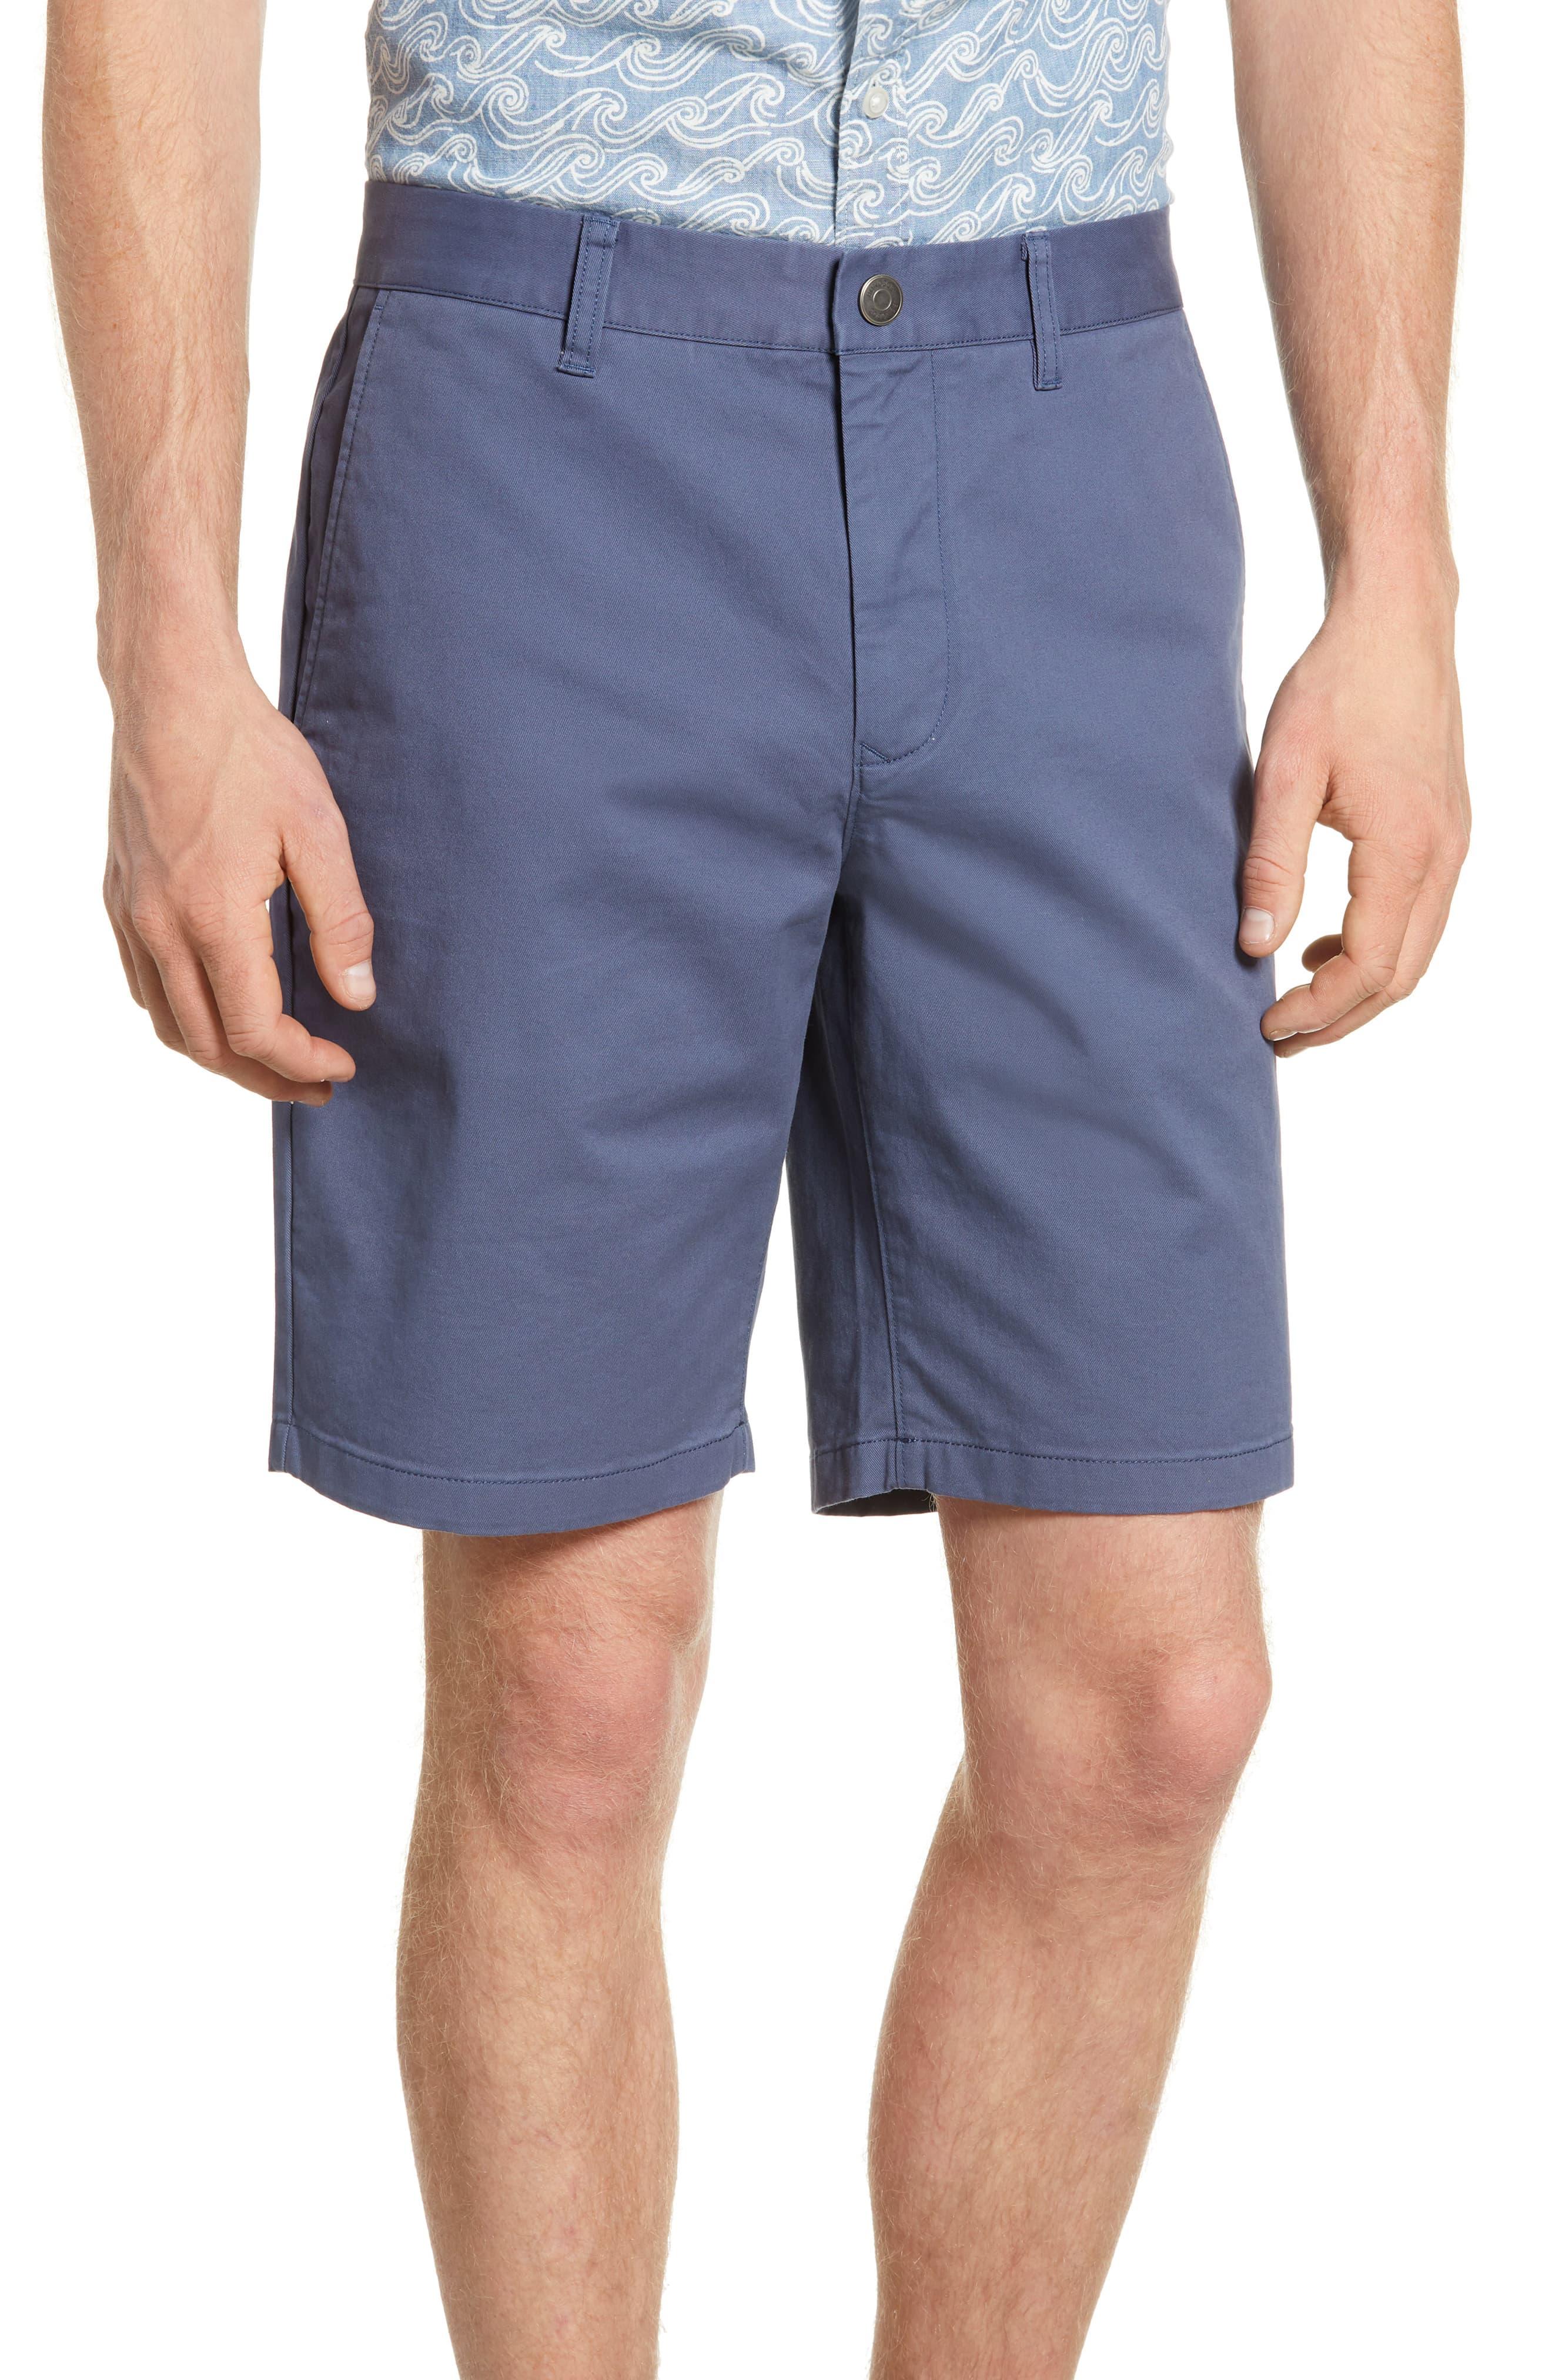 Bonobos Stretch Washed Chino 9-inch Shorts in Blue for Men - Lyst